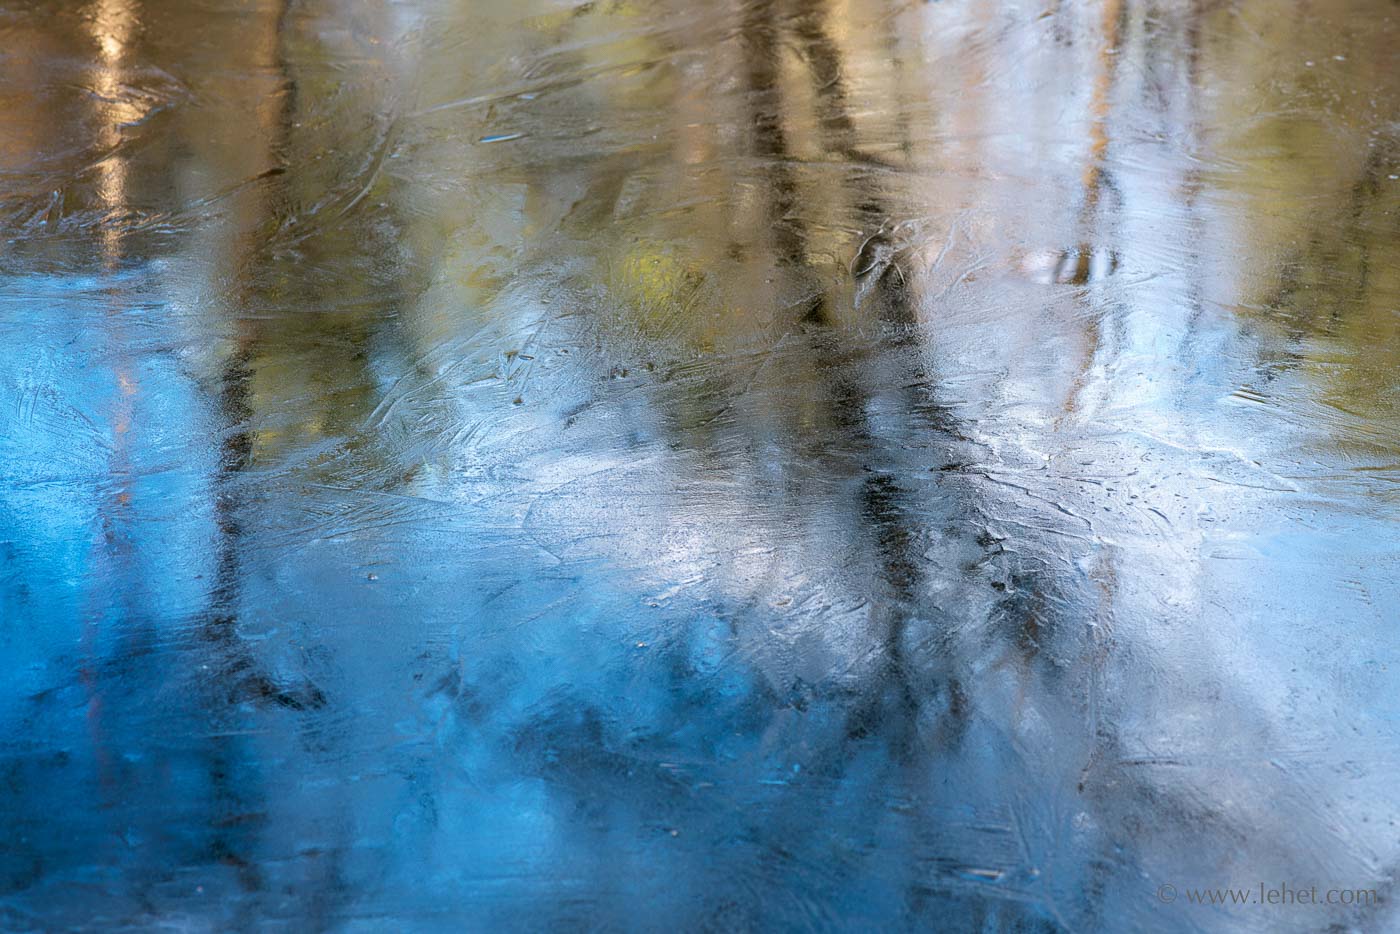 New Ice with Brush Stroke Texture, Vermont